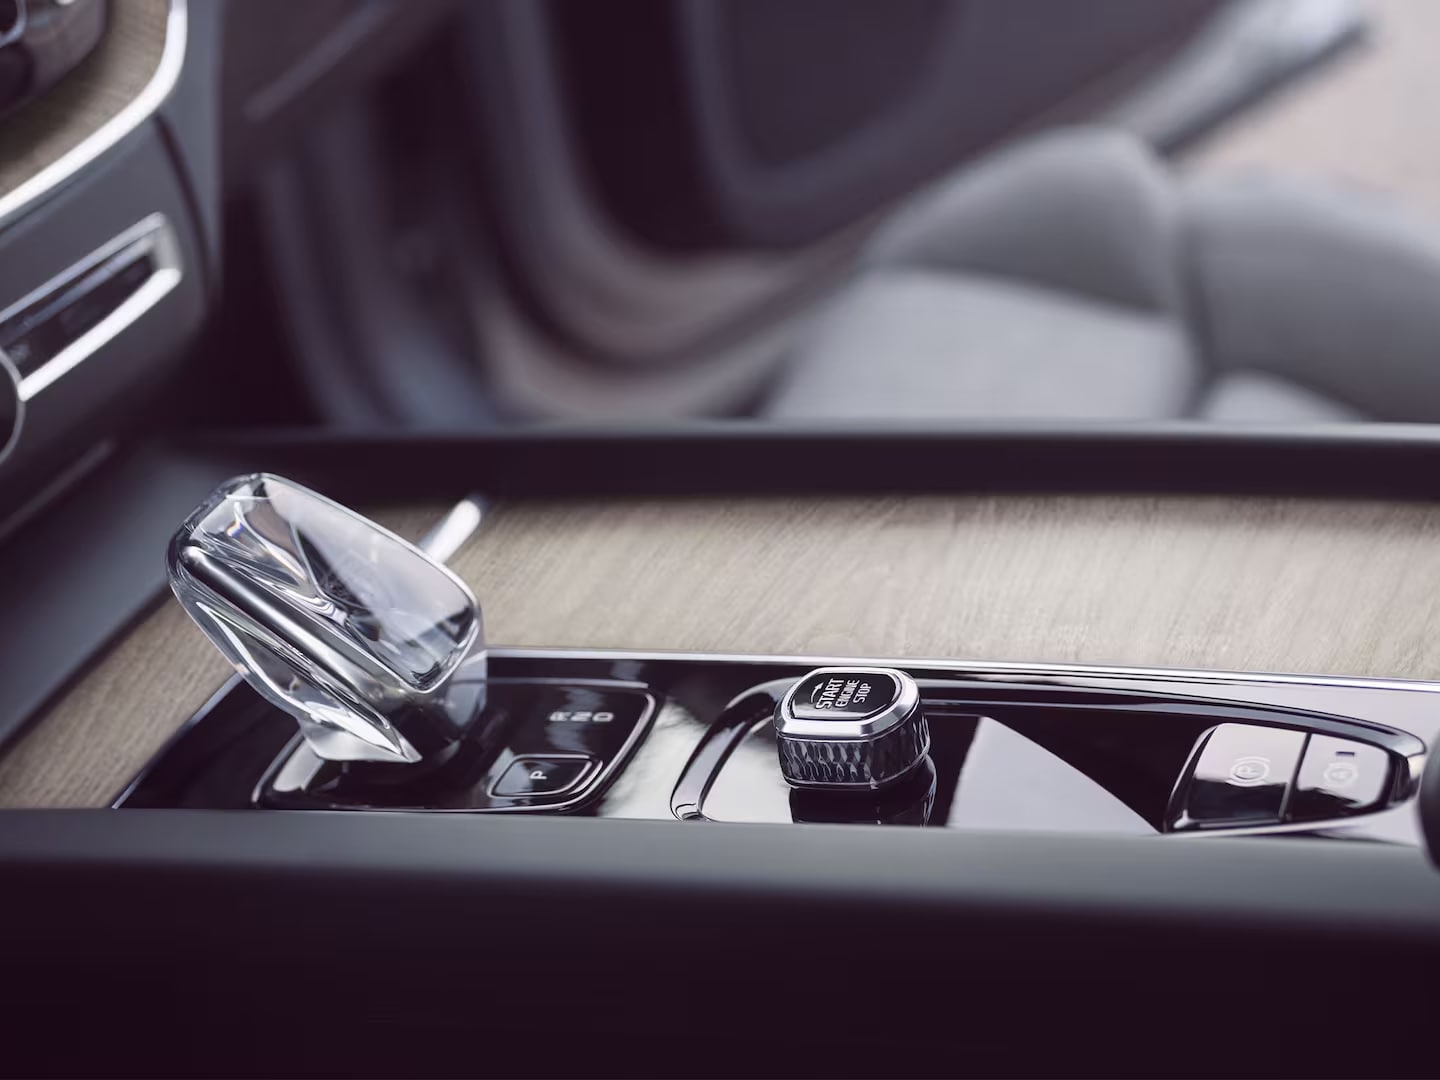 Inside a Volvo XC60 Recharge, a crystal gear shifter in genuine Swedish crystal from Orrefors.